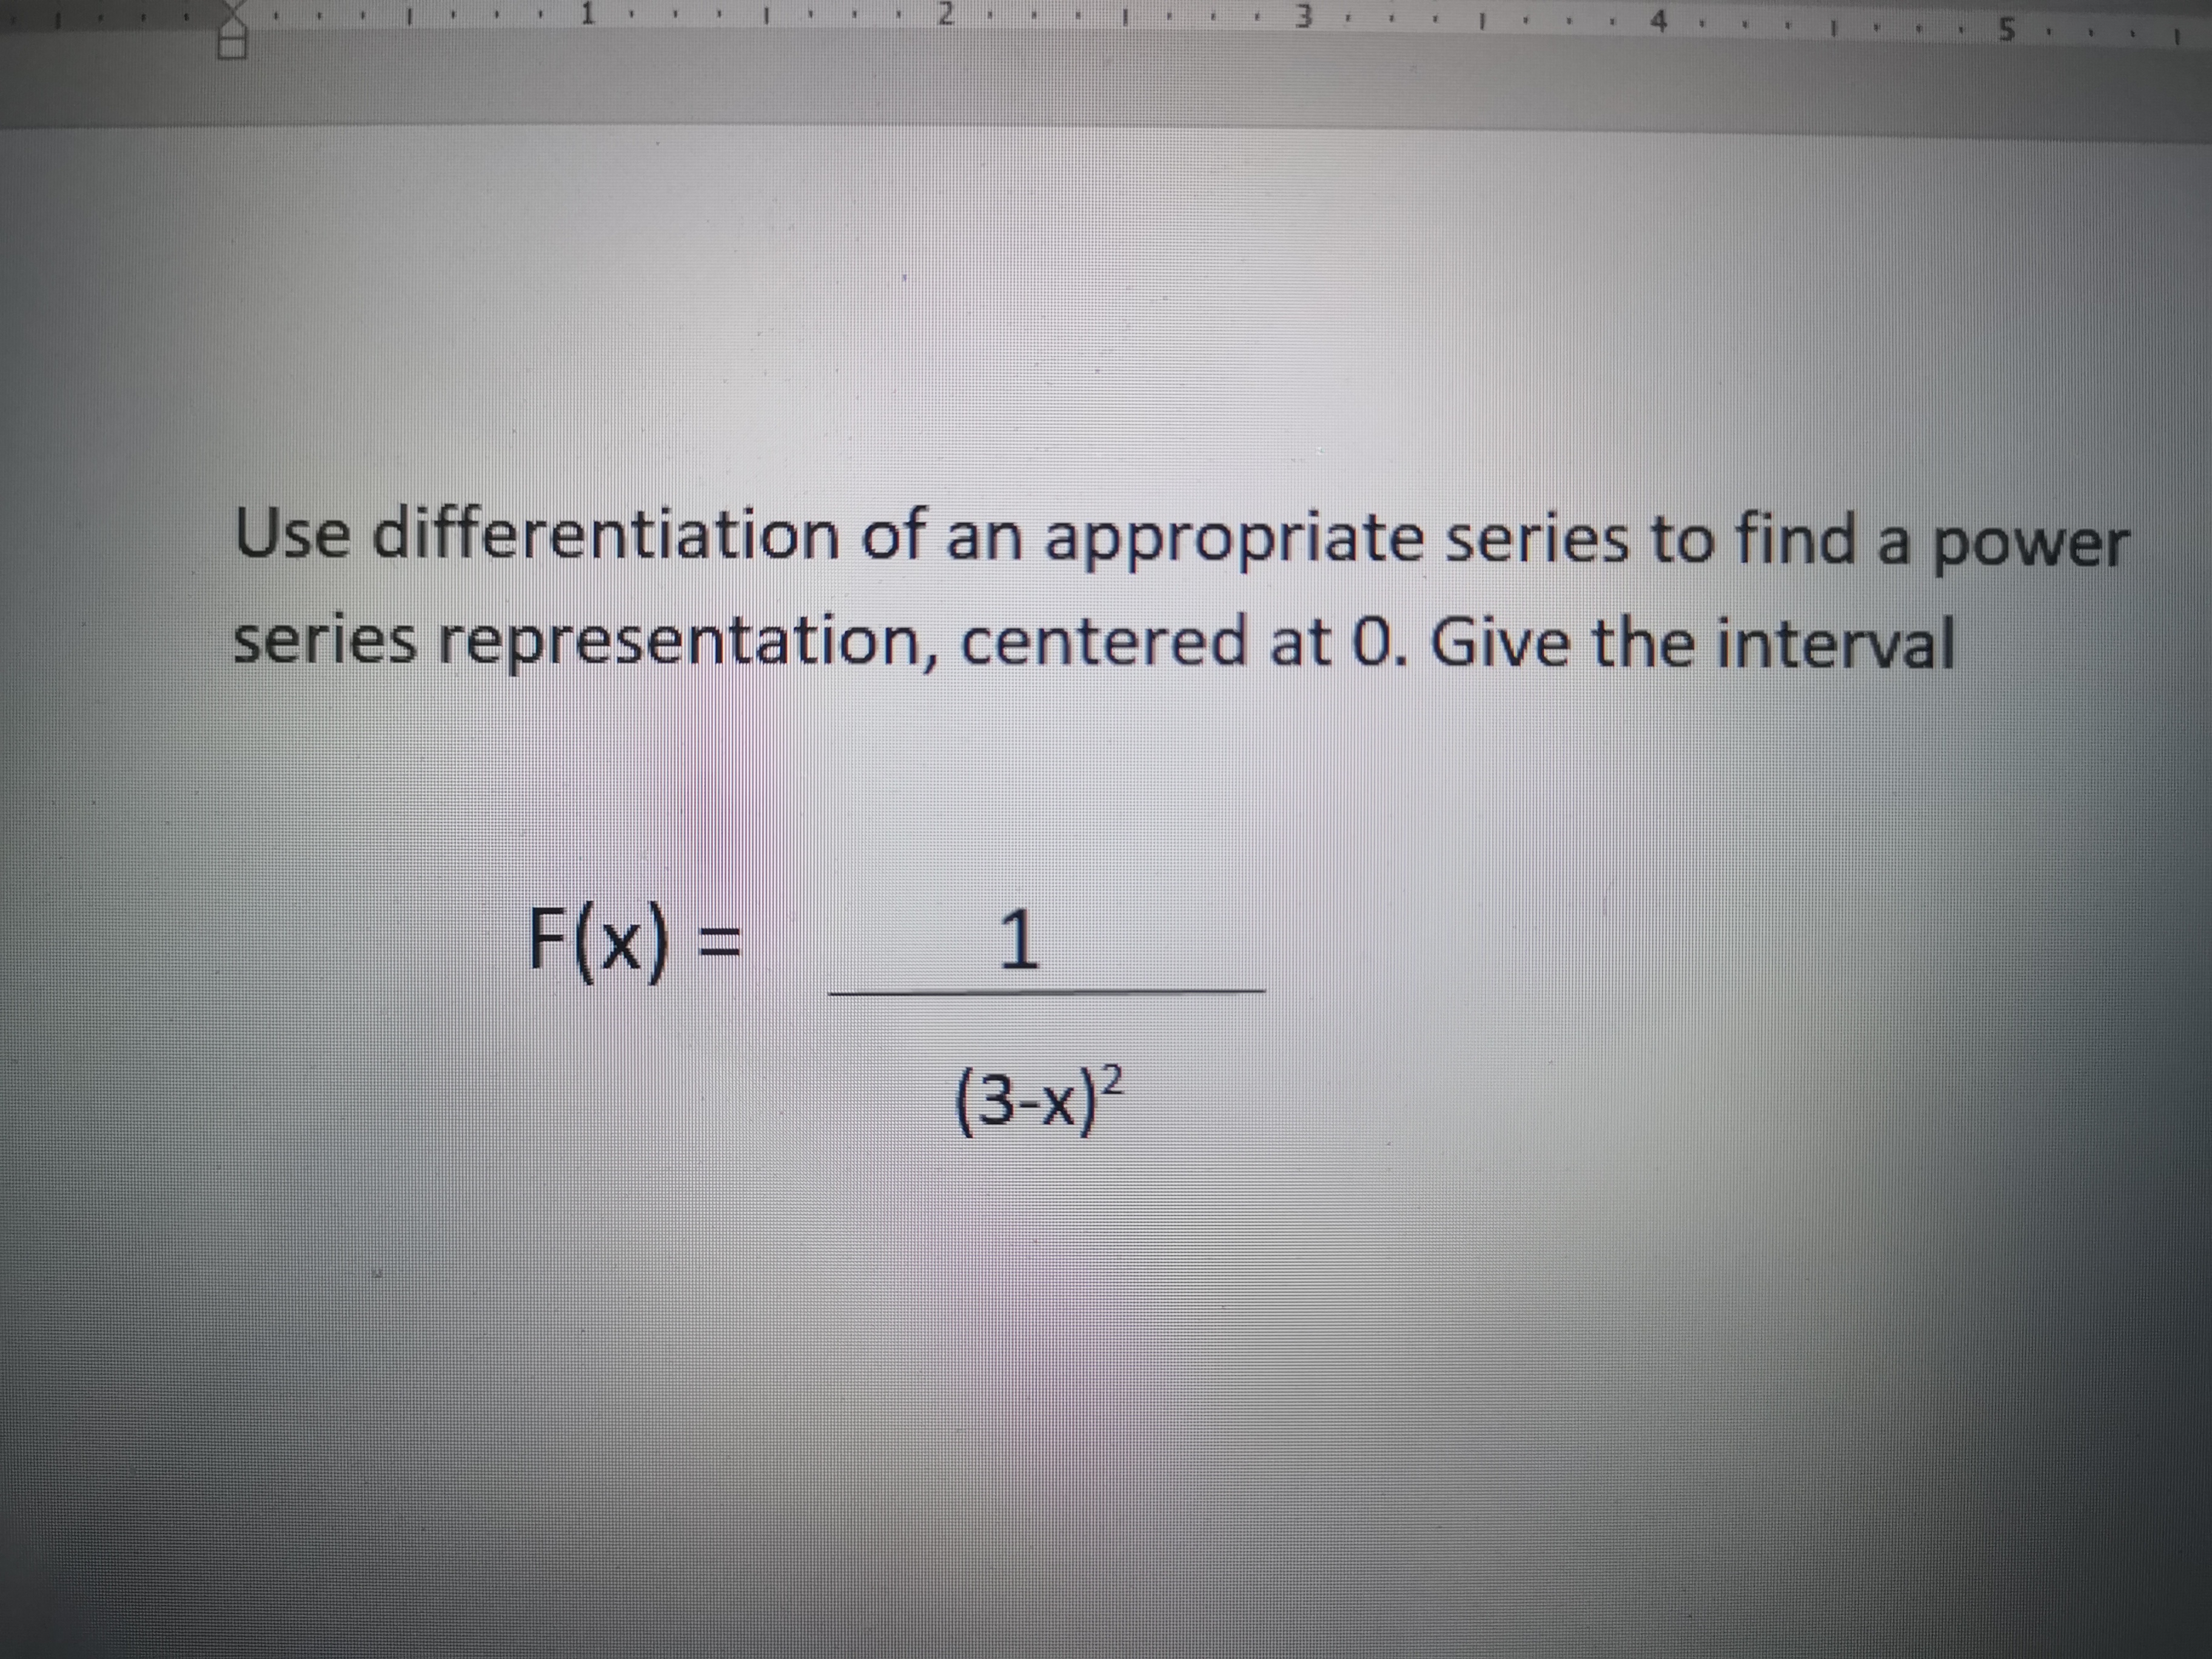 Use differentiation of an appropriate series to find a power
series representation, centered at 0. Give the interval
